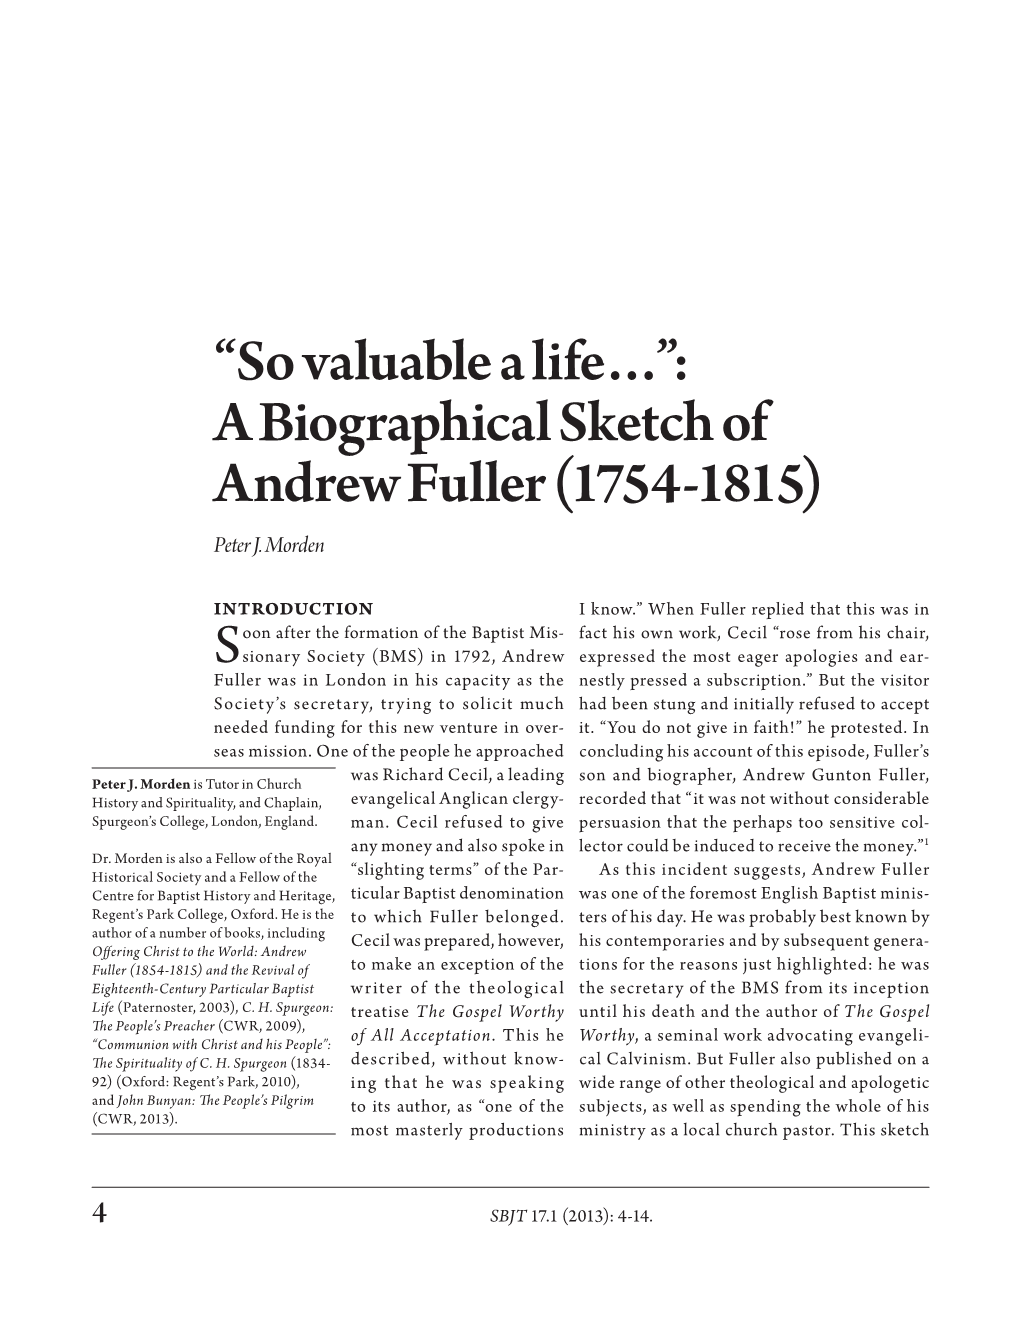 A Biographical Sketch of Andrew Fuller (1754-1815) Peter J